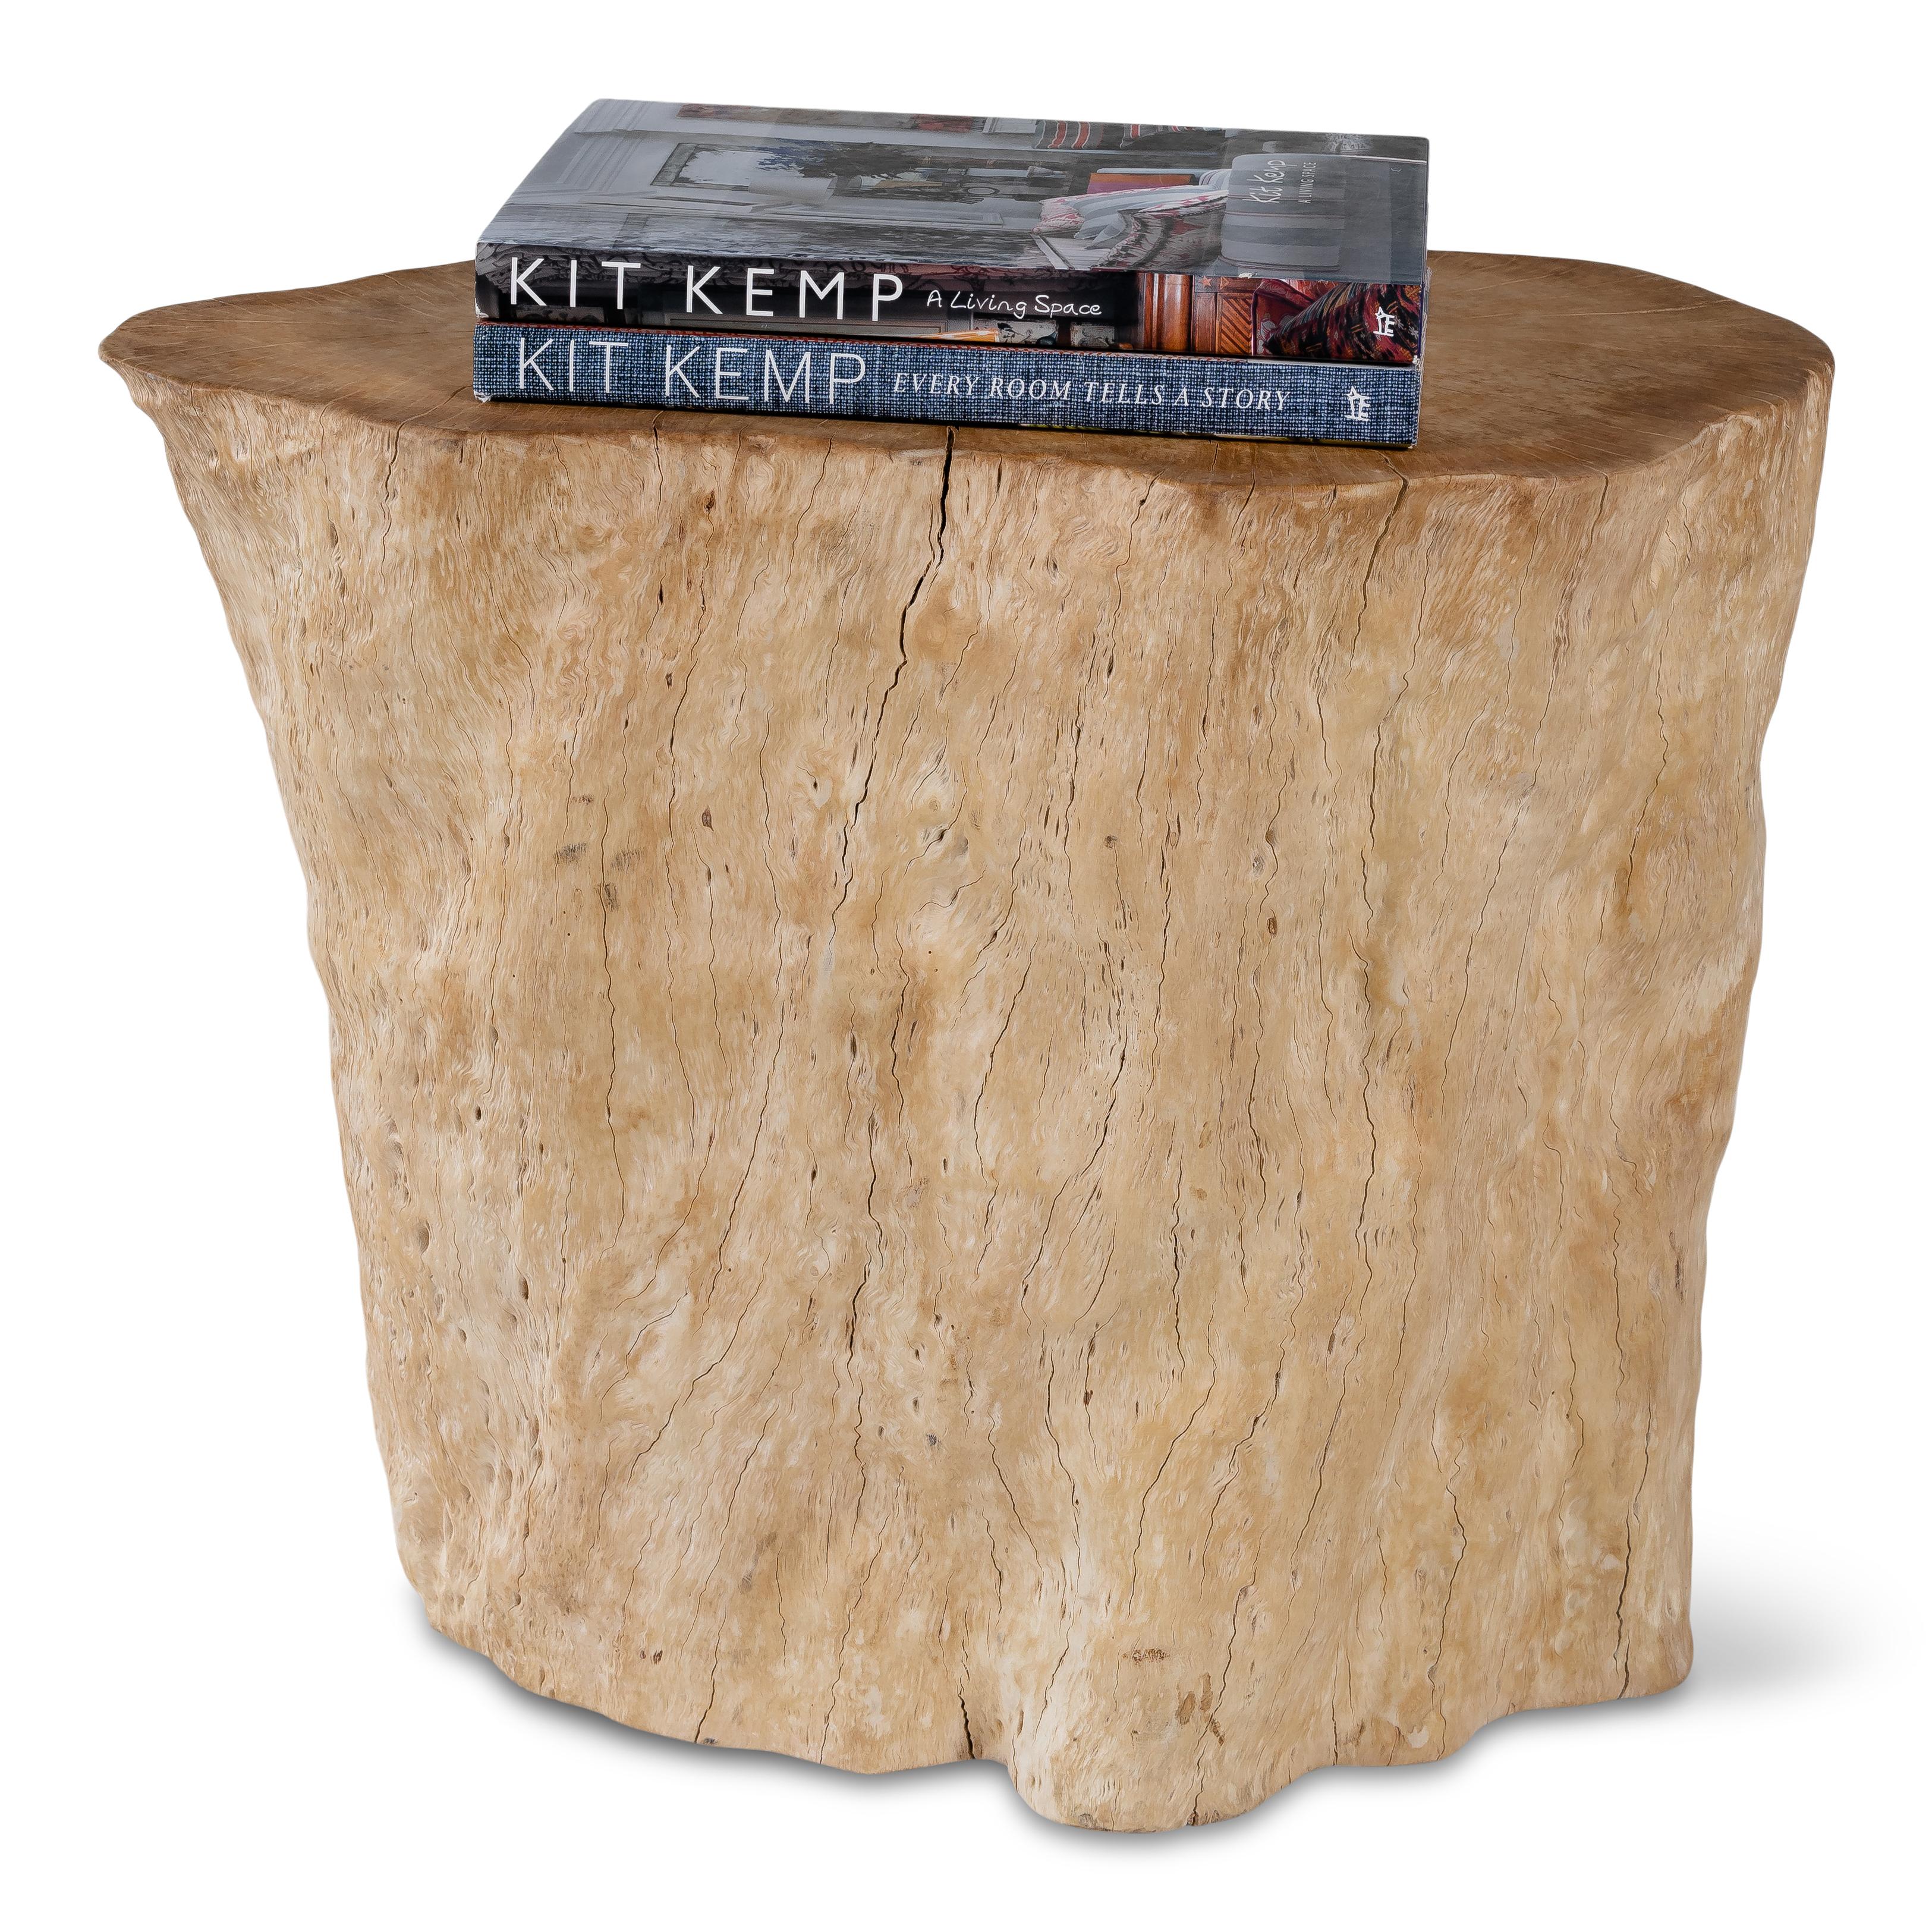 Organic form bleached iron wood stump table.

This piece is a part of Brendan Bass’s one-of-a-kind collection, Le Monde. French for “The World”, the Le Monde collection is made up of rare and hard to find pieces curated by Brendan from estate sales,